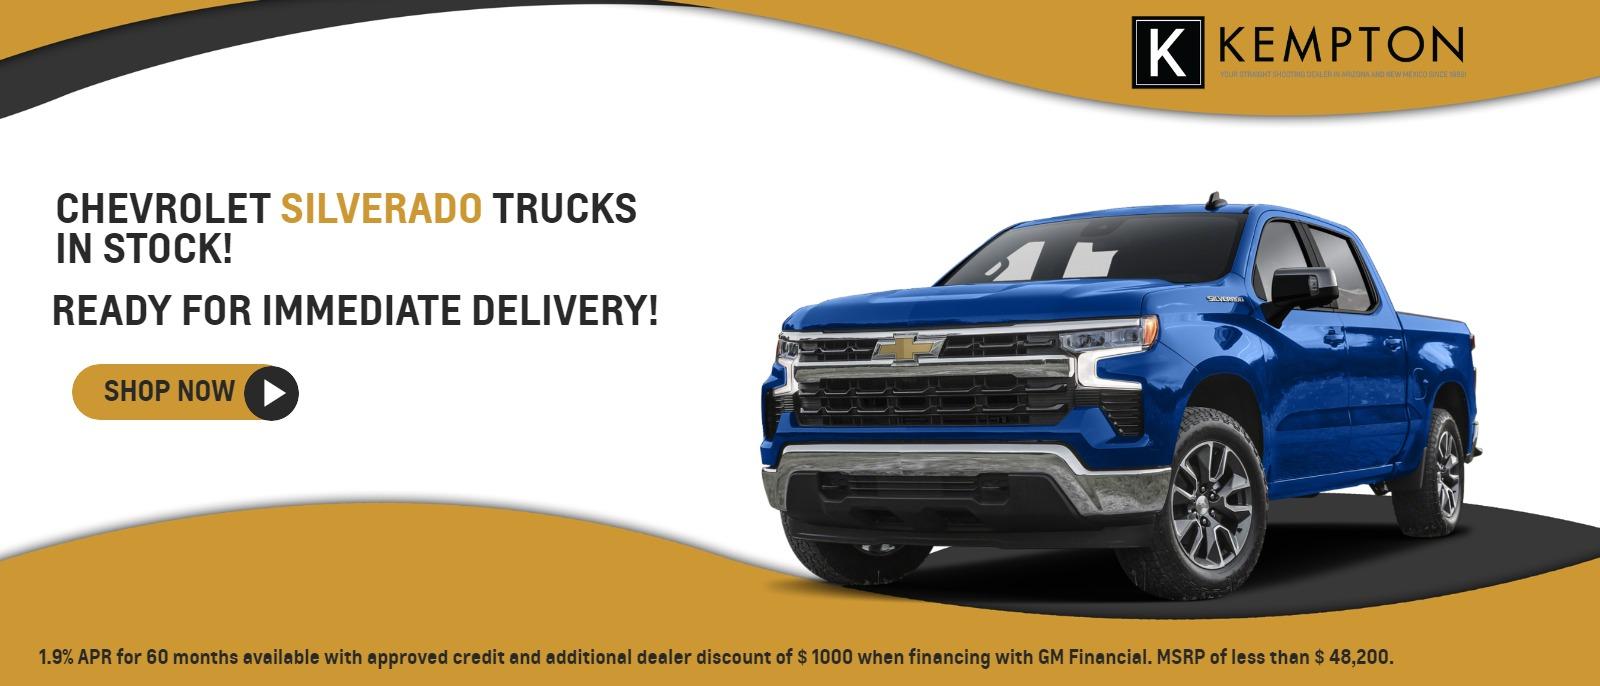 Chevrolet Silverado Trucks in stock!
Ready for immediate delivery!

Interest rates as low as 1.9% and $1000 dealer discount when financing with GM Financial.